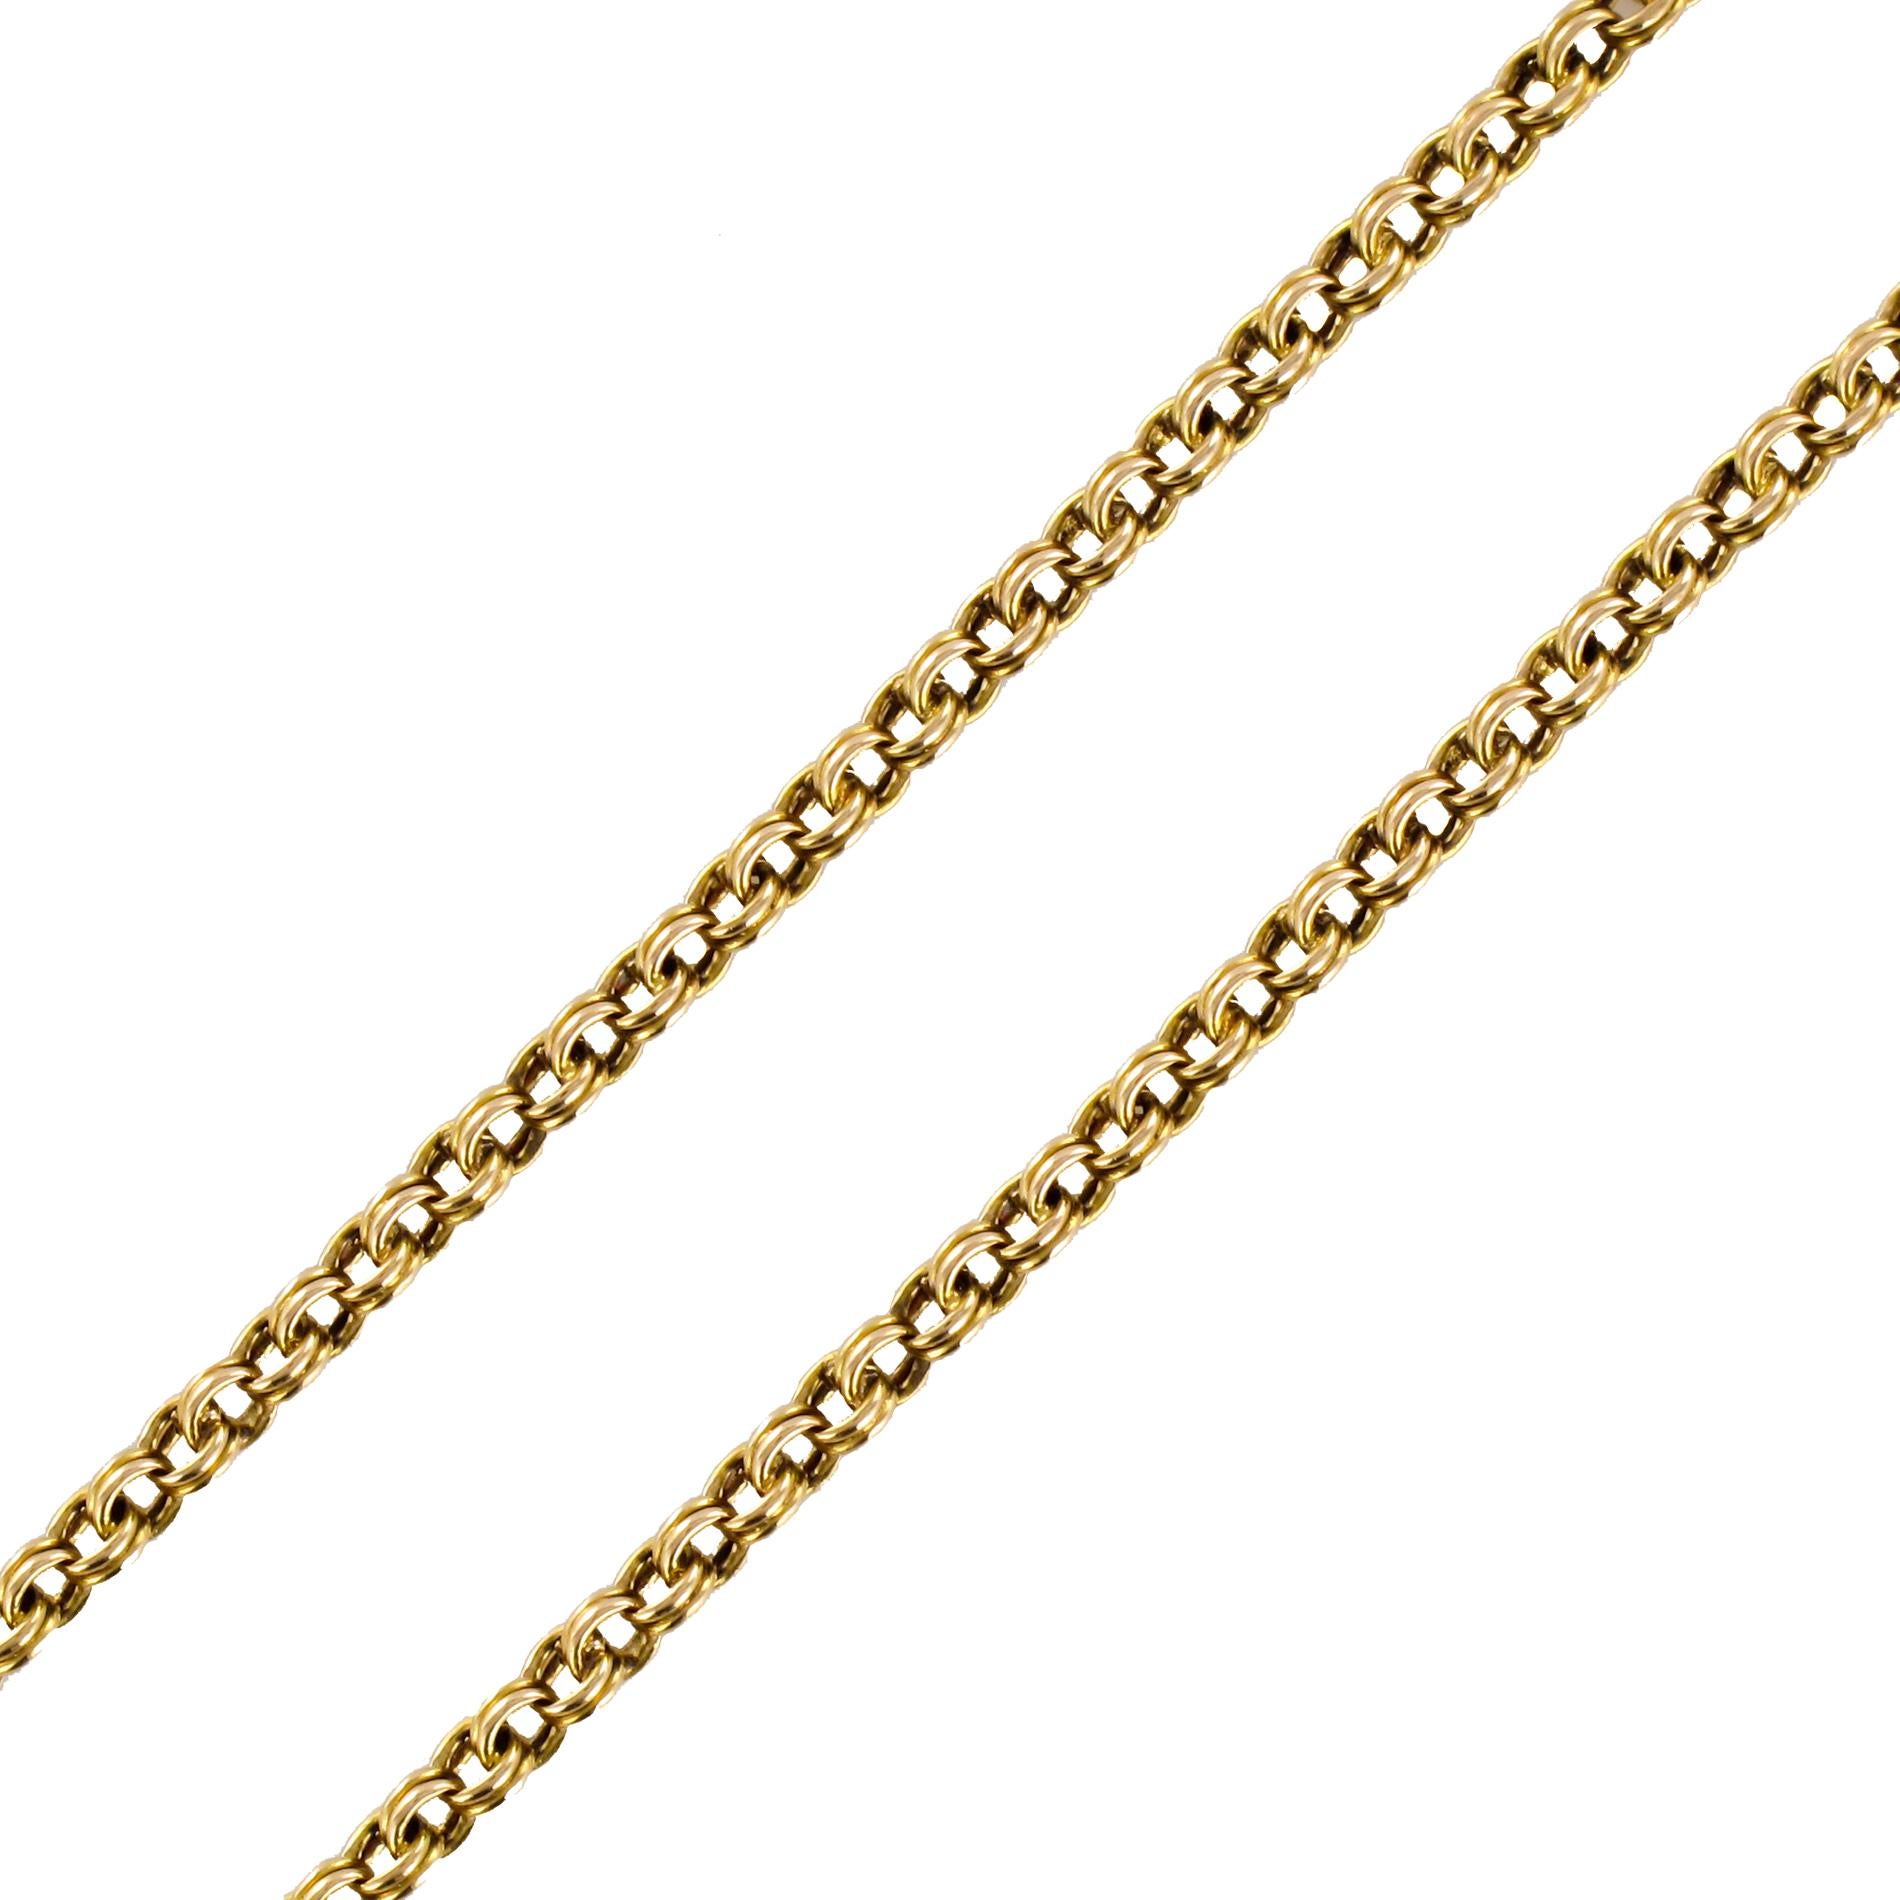 Chain in 18 karat yellow gold, eagle's head hallmark.
This antique chain consists of a double jasron link. The clasp is a large spring ring.
Length: 57.5 cm, thickness: 2.7 mm.
Total weight of the jewel: approximately 16.9 g.
Authentic antique jewel